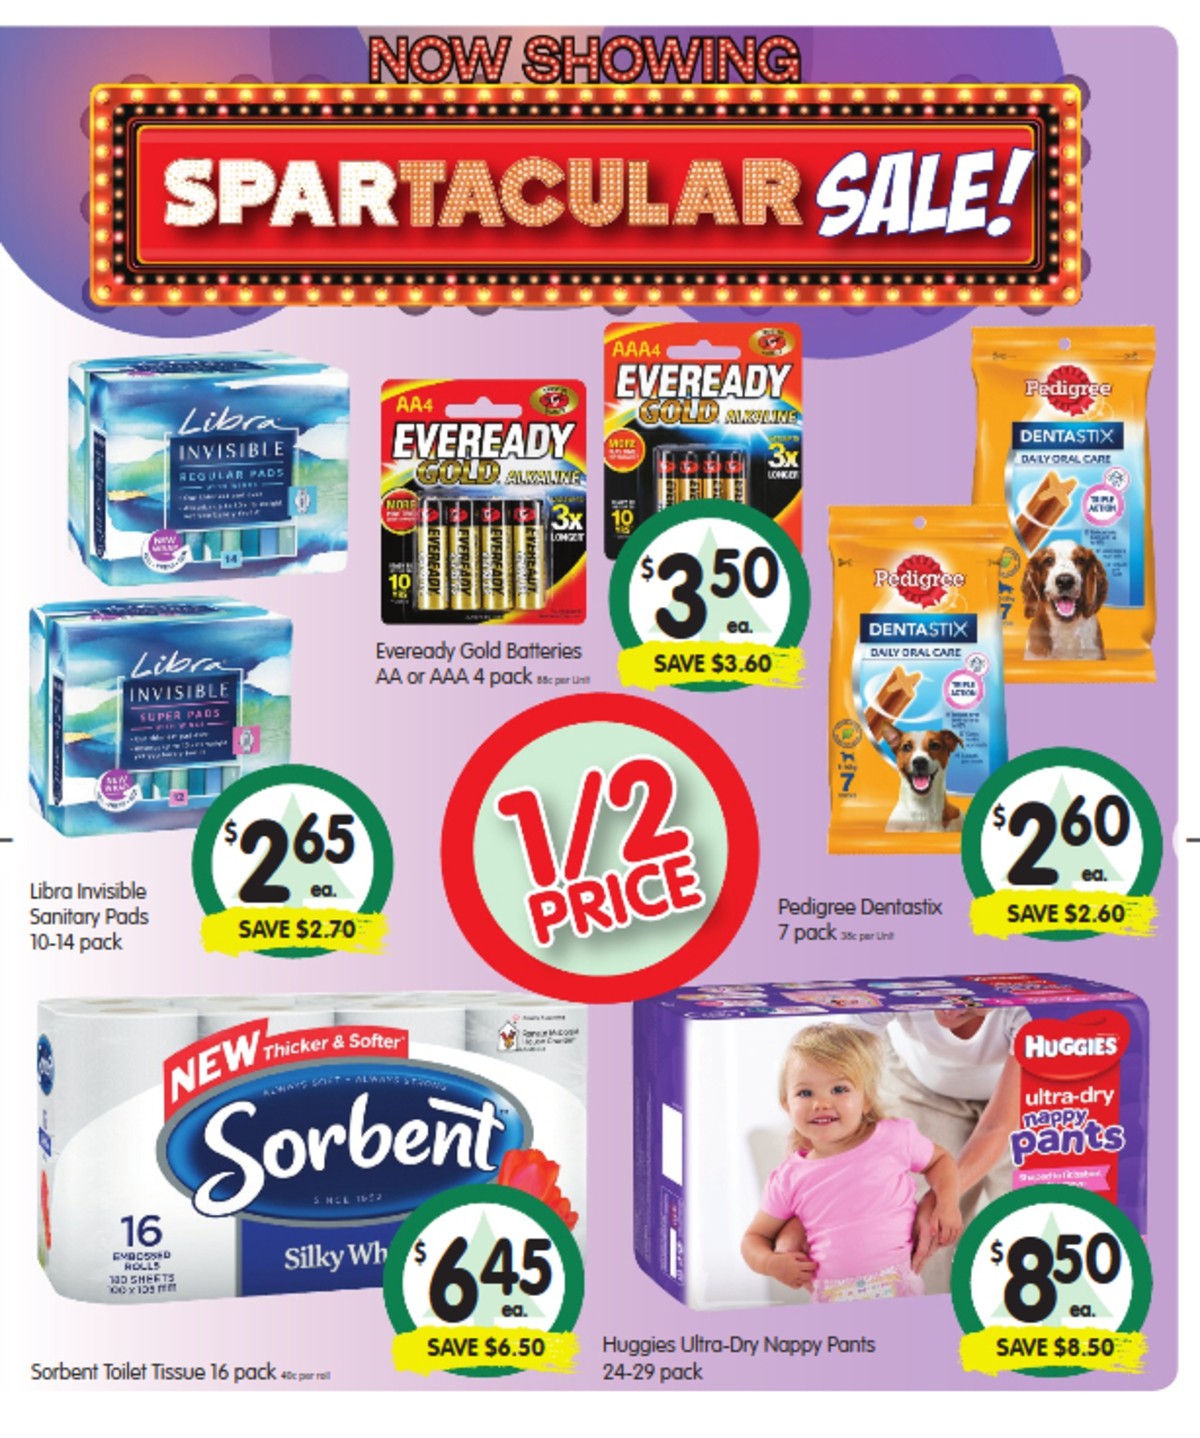 Spar Catalogues from 15 May